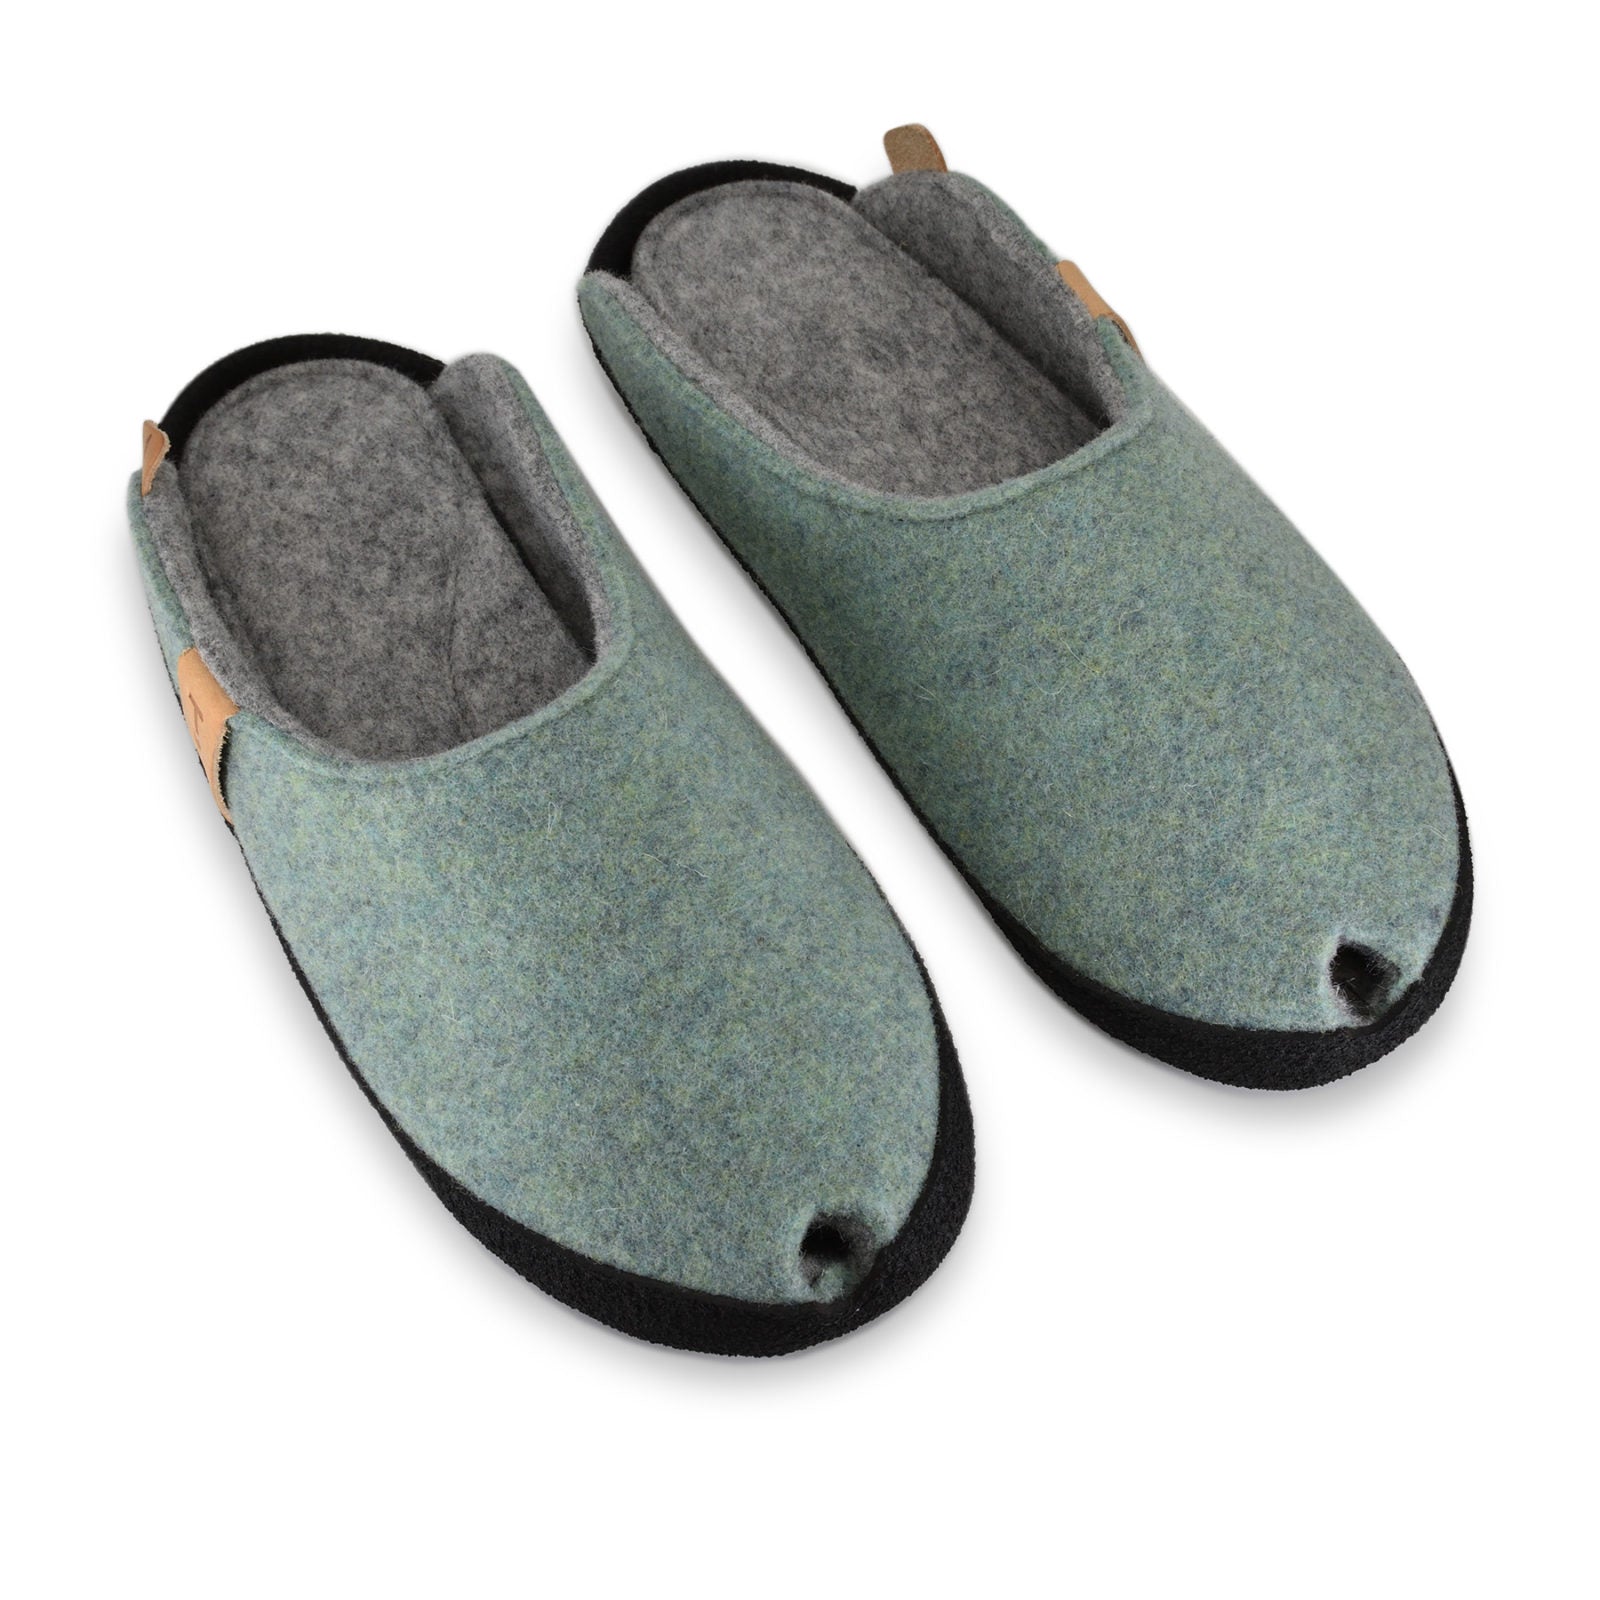 Dr Feet 2253 Slip On Felt Slippers in Charcoal Grey | rubyshoesday